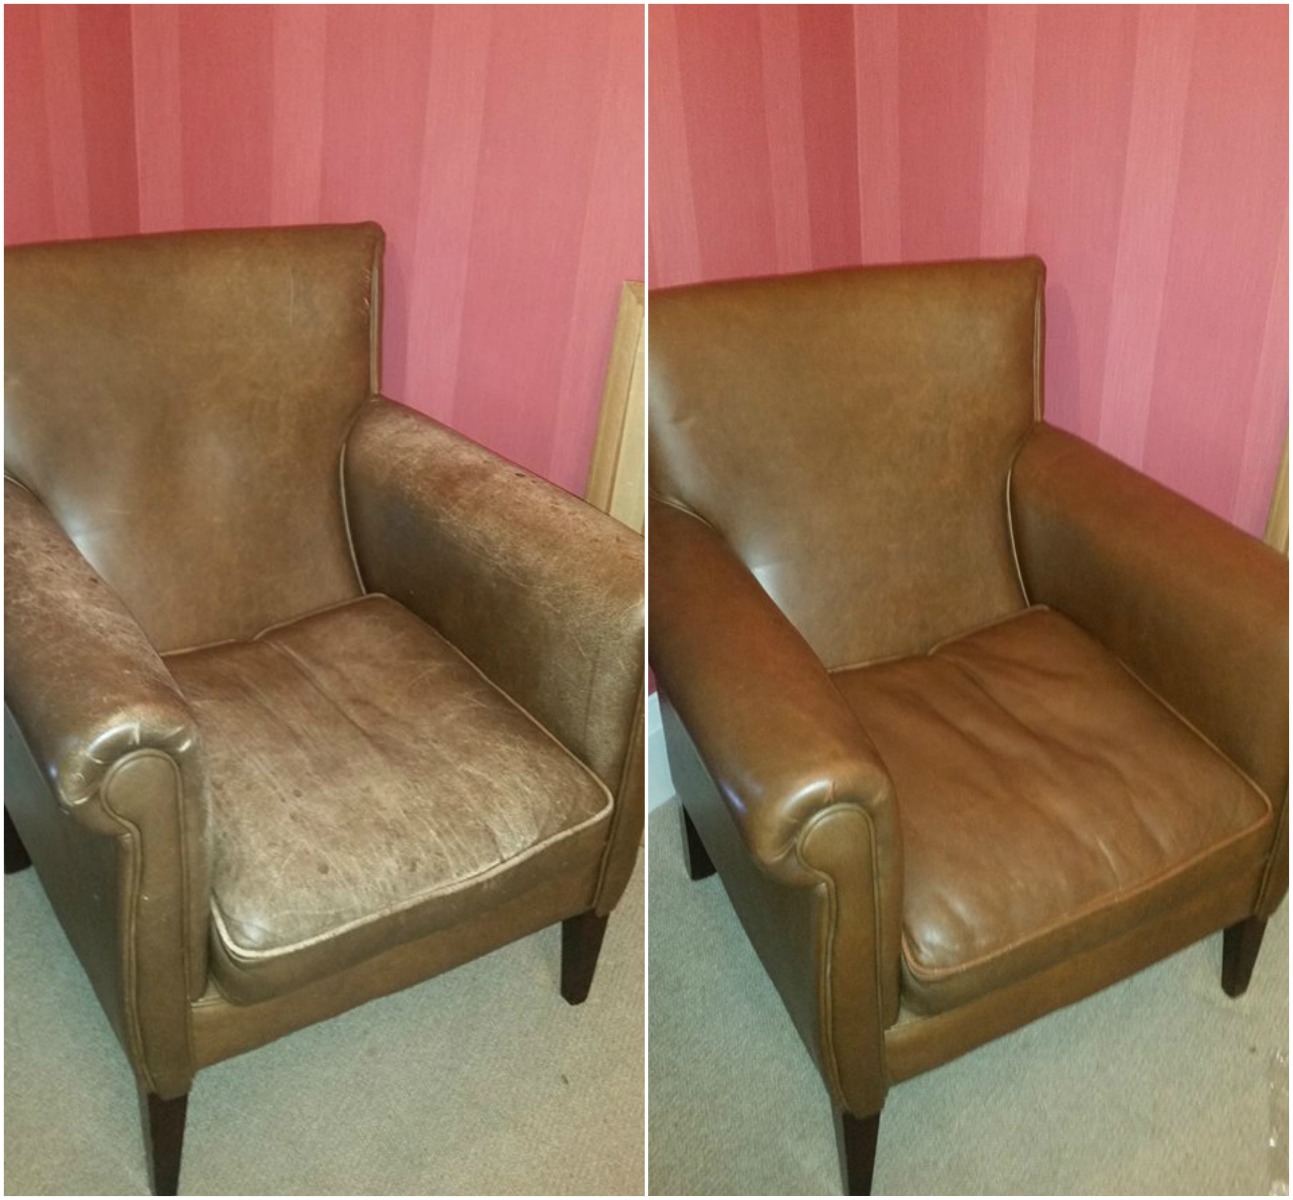 Restoring Colour To A Faded Leather Sofa, Worn Out Leather Sofa Repair